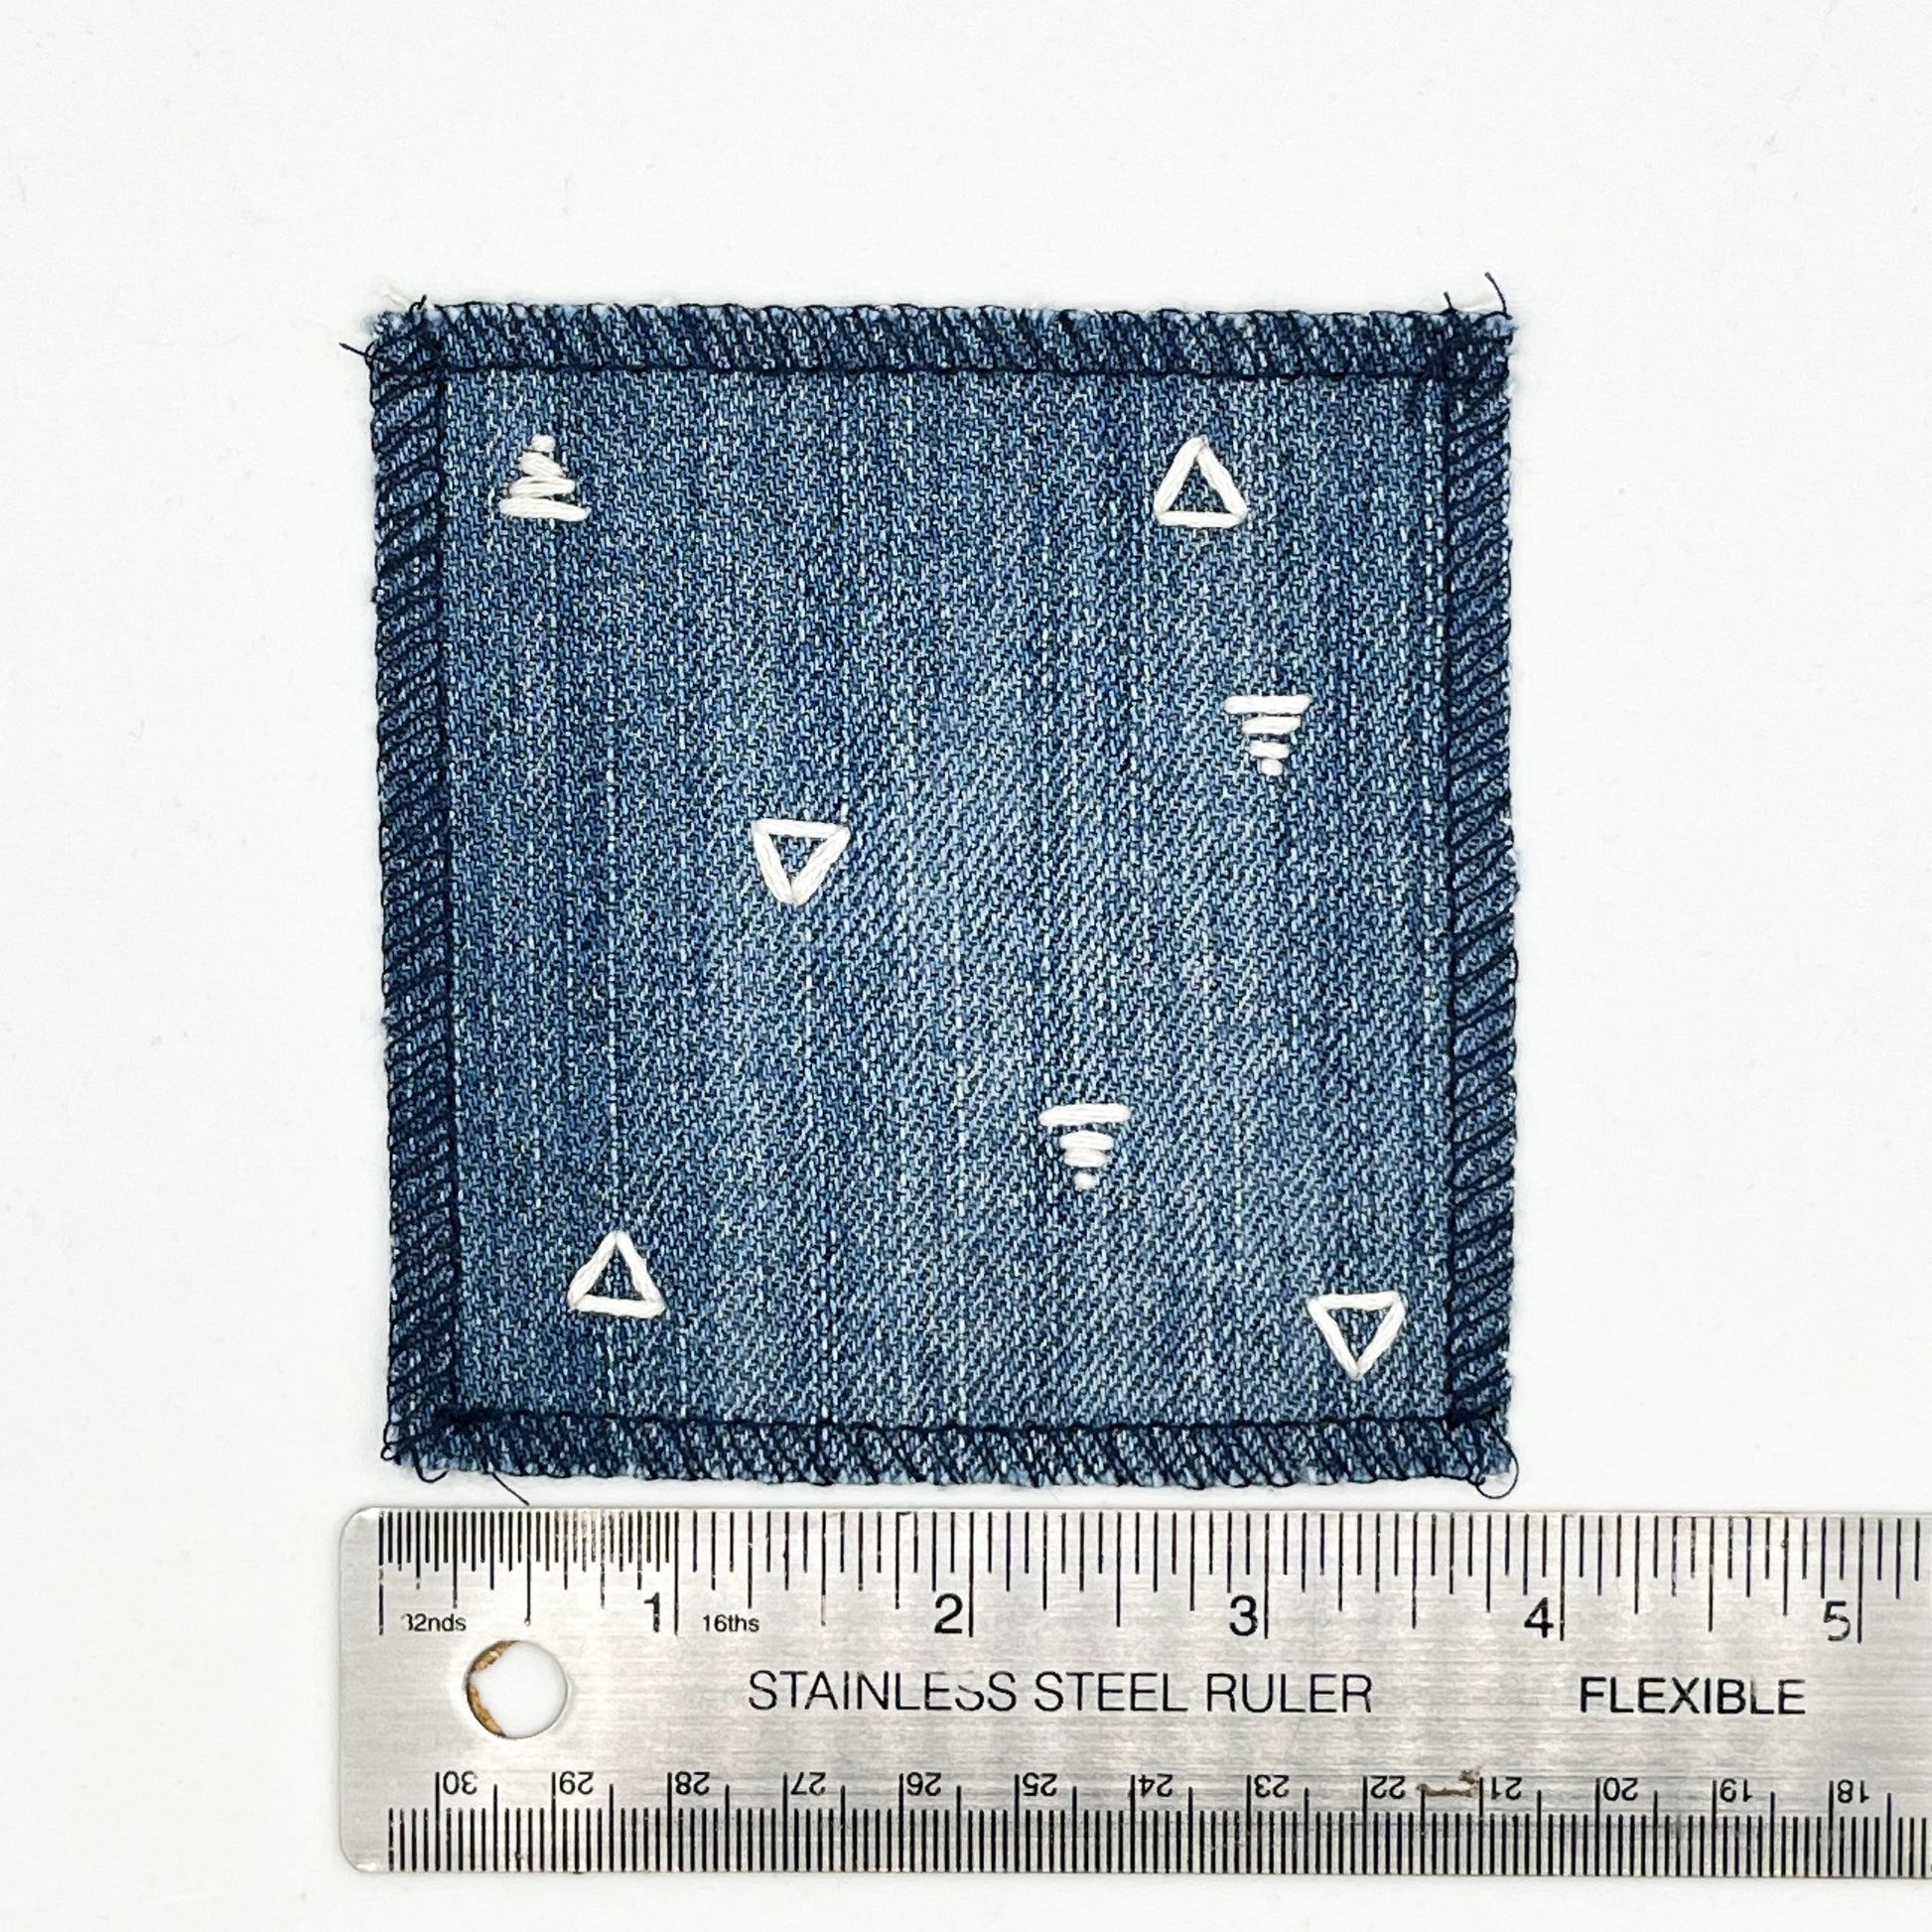 a square patch made out of denim, handstitched with scattered ivory triangles, some as outlines some with a line fill, with overlocked edges, on a white background, next to a ruler showing a width of 4 inches